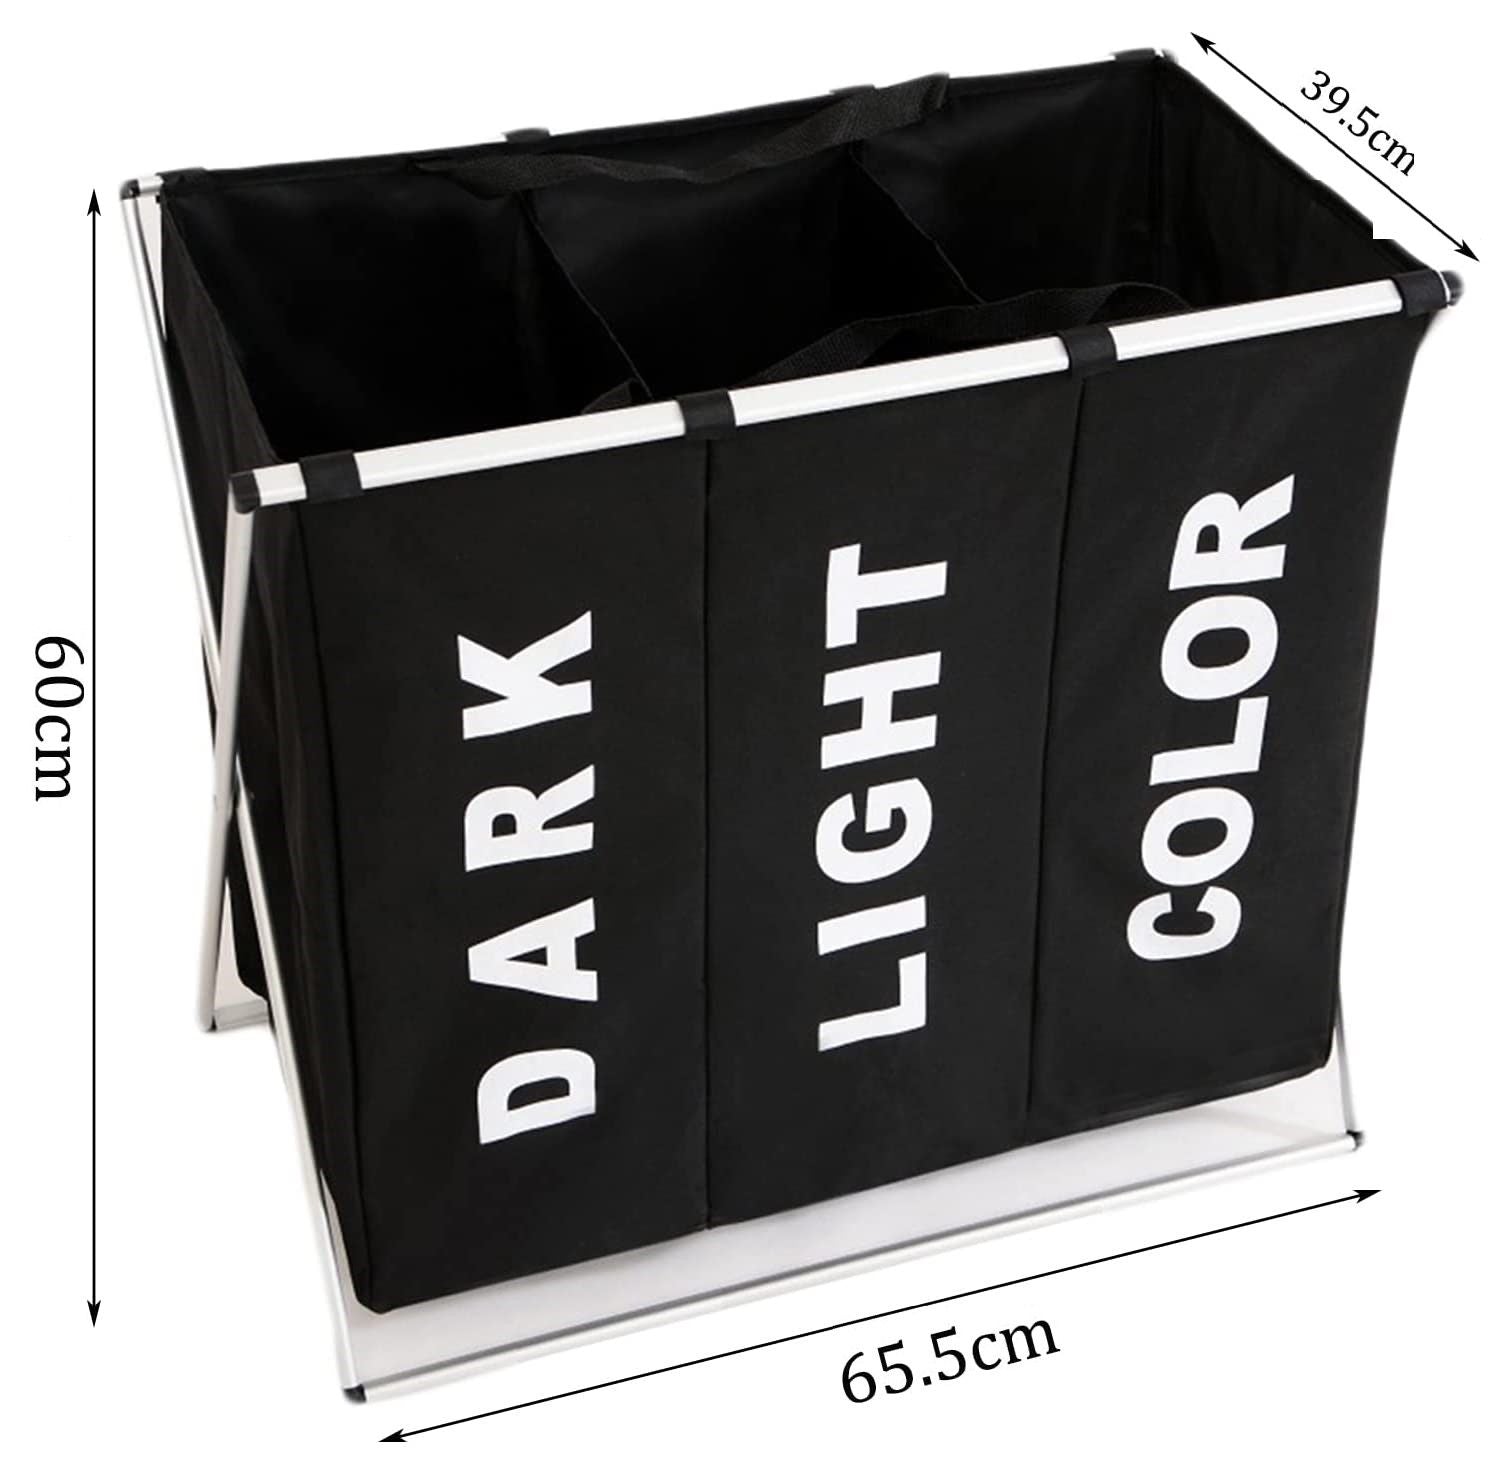 3 in 1 Large 135L Laundry Clothes Hamper Basket with Waterproof bags and Aluminum Frame (Black) - SILBERSHELL